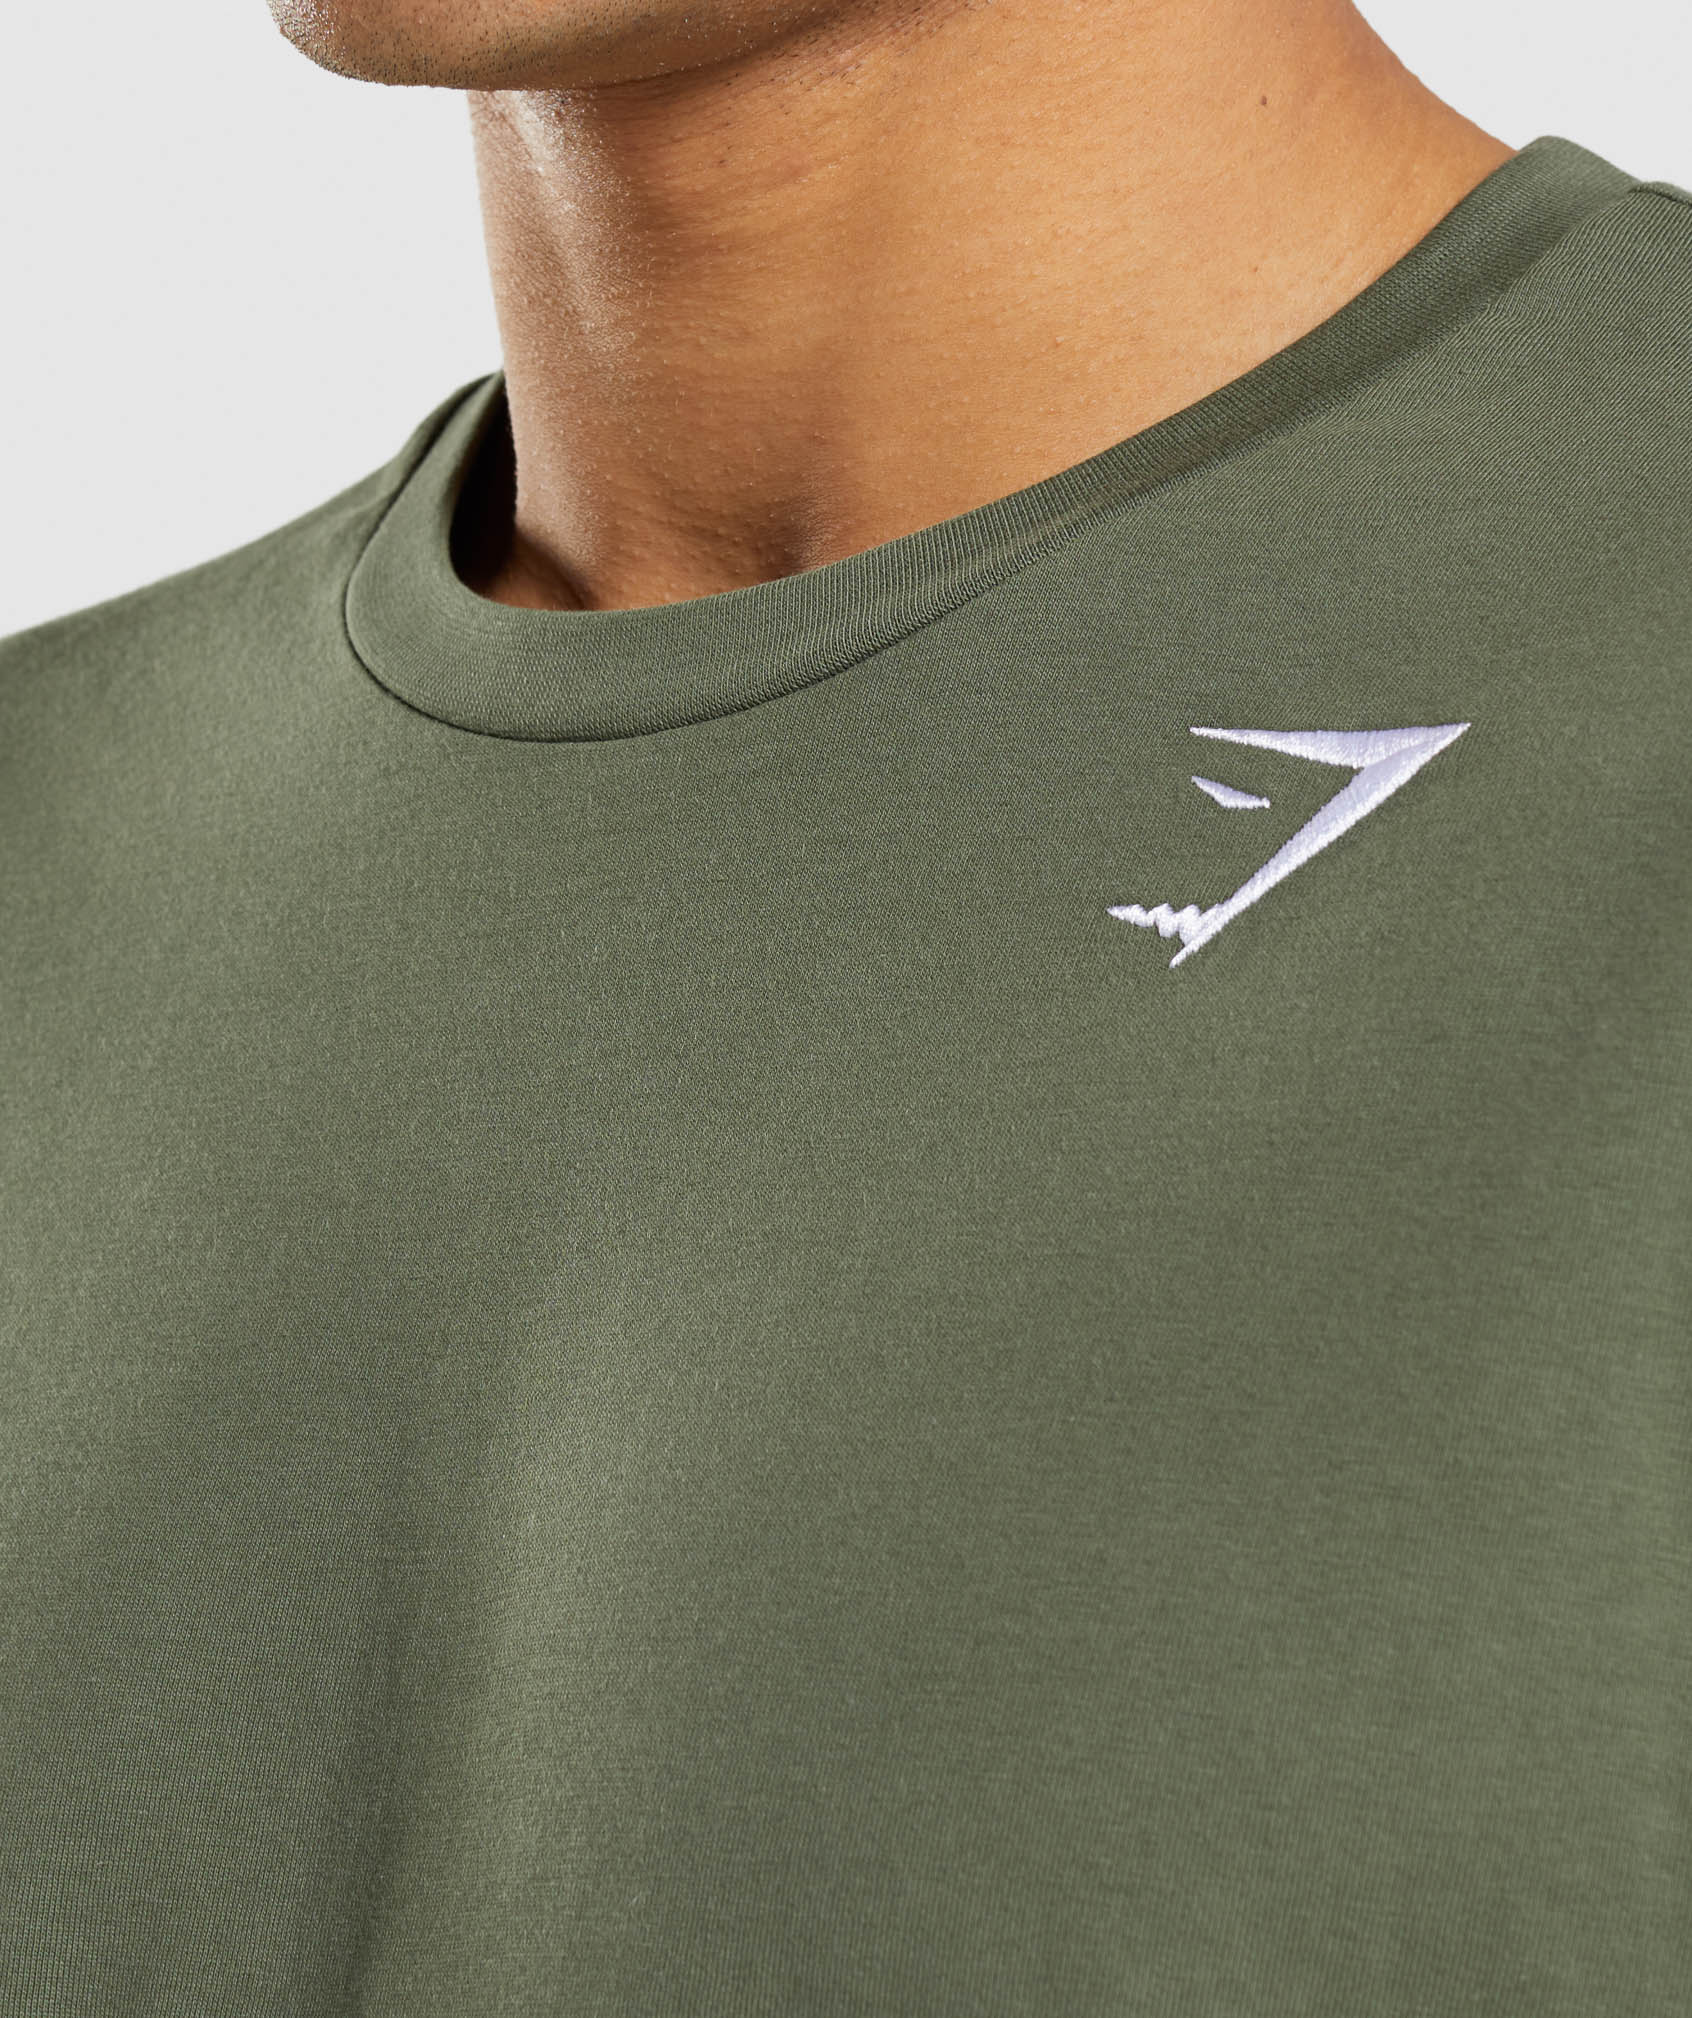 Crest T-Shirt in Core Olive - view 5